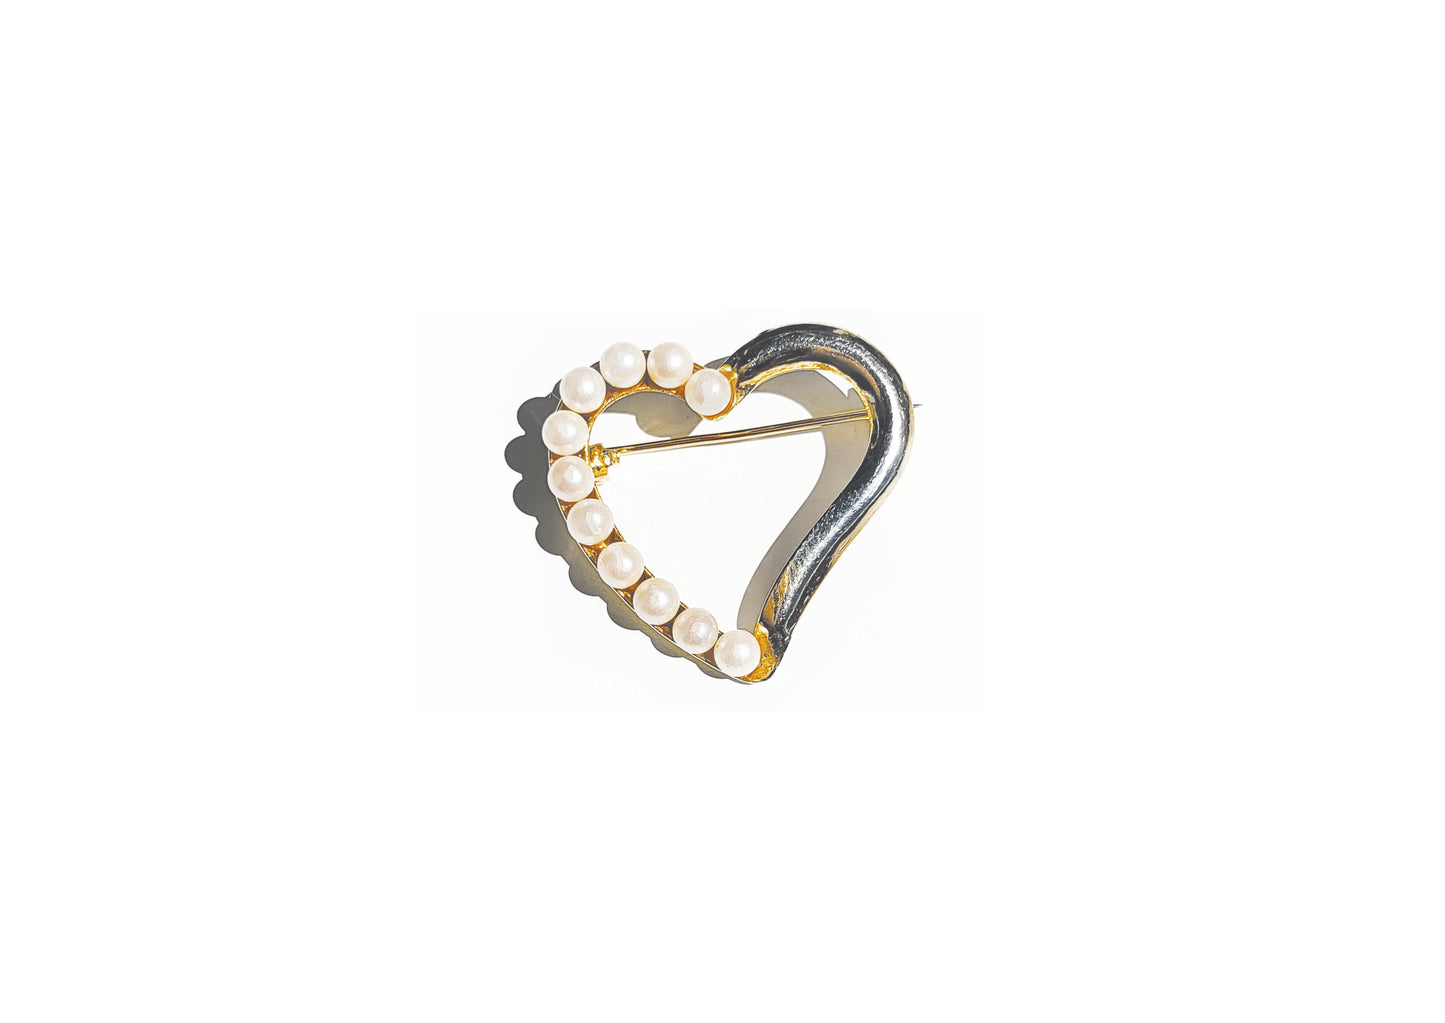 Vintage Gold Tone Heart Brooch with Faux Pearls